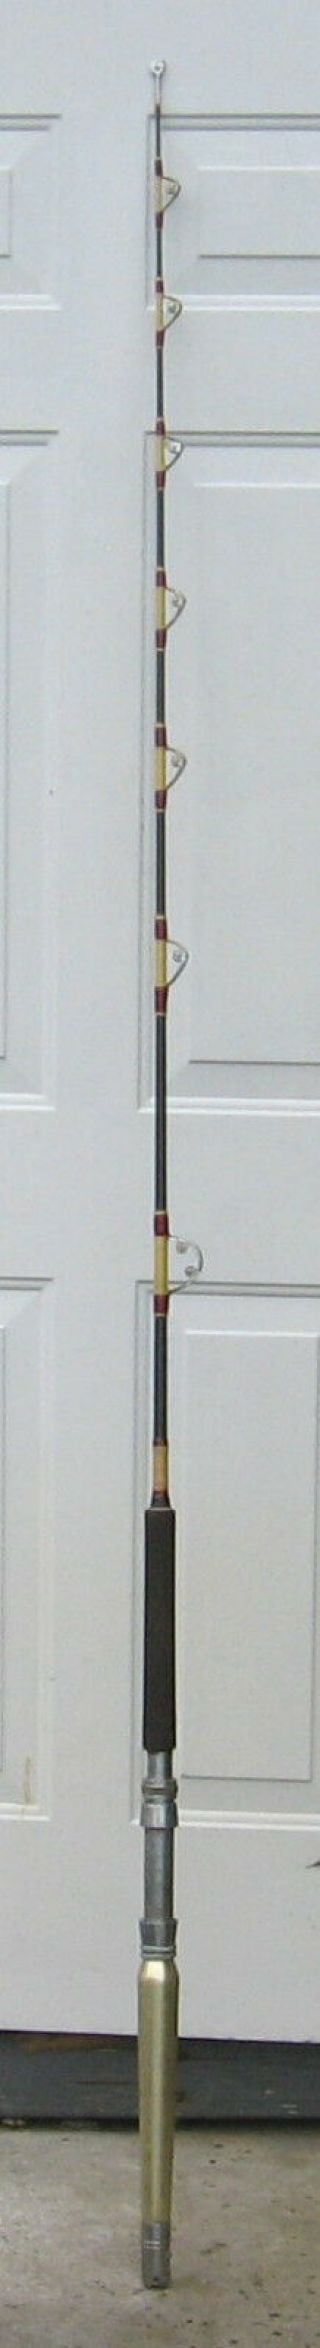 Vintage Harnell Custom 12 Lb Trolling Fishing Rod Aftco Guides 2 Piece 6 